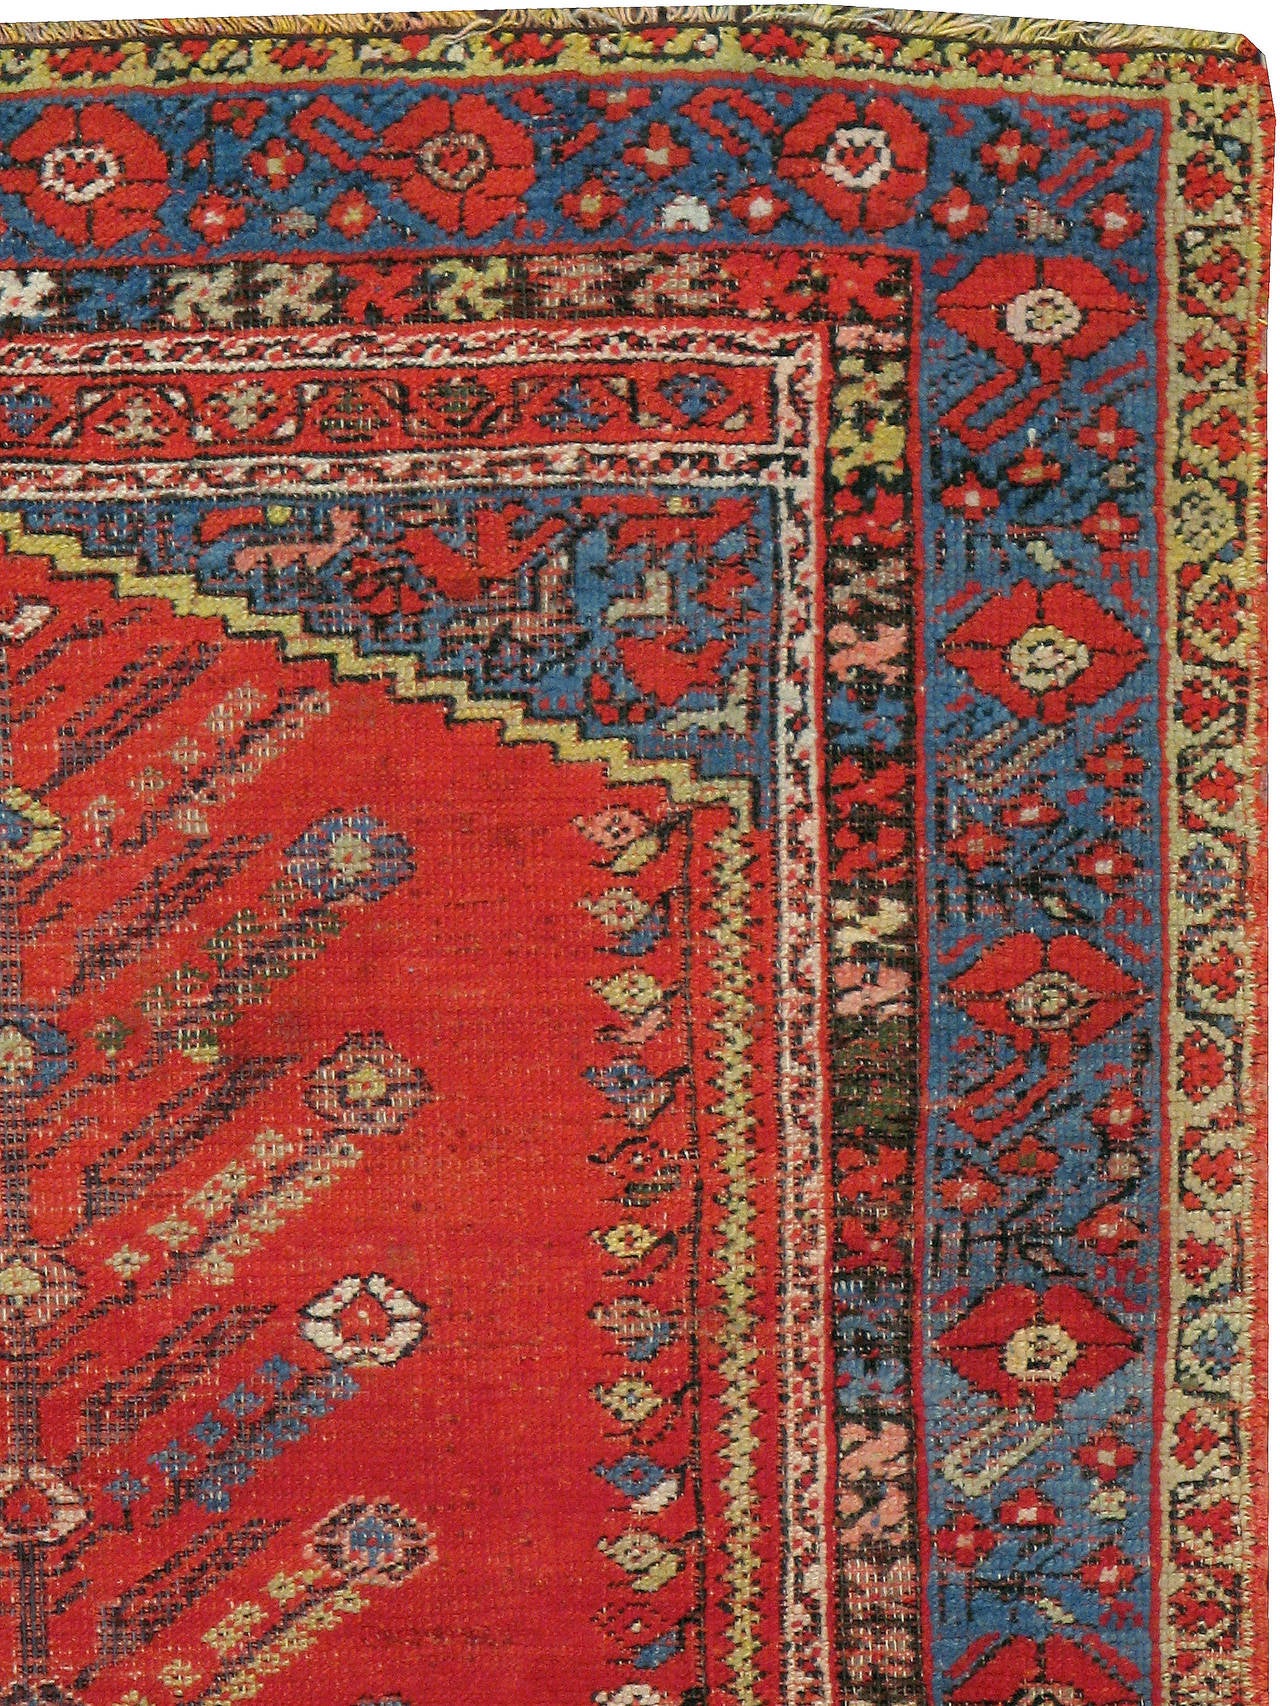 An antique Turkish Kula carpet from the turn of the 20th century with the 